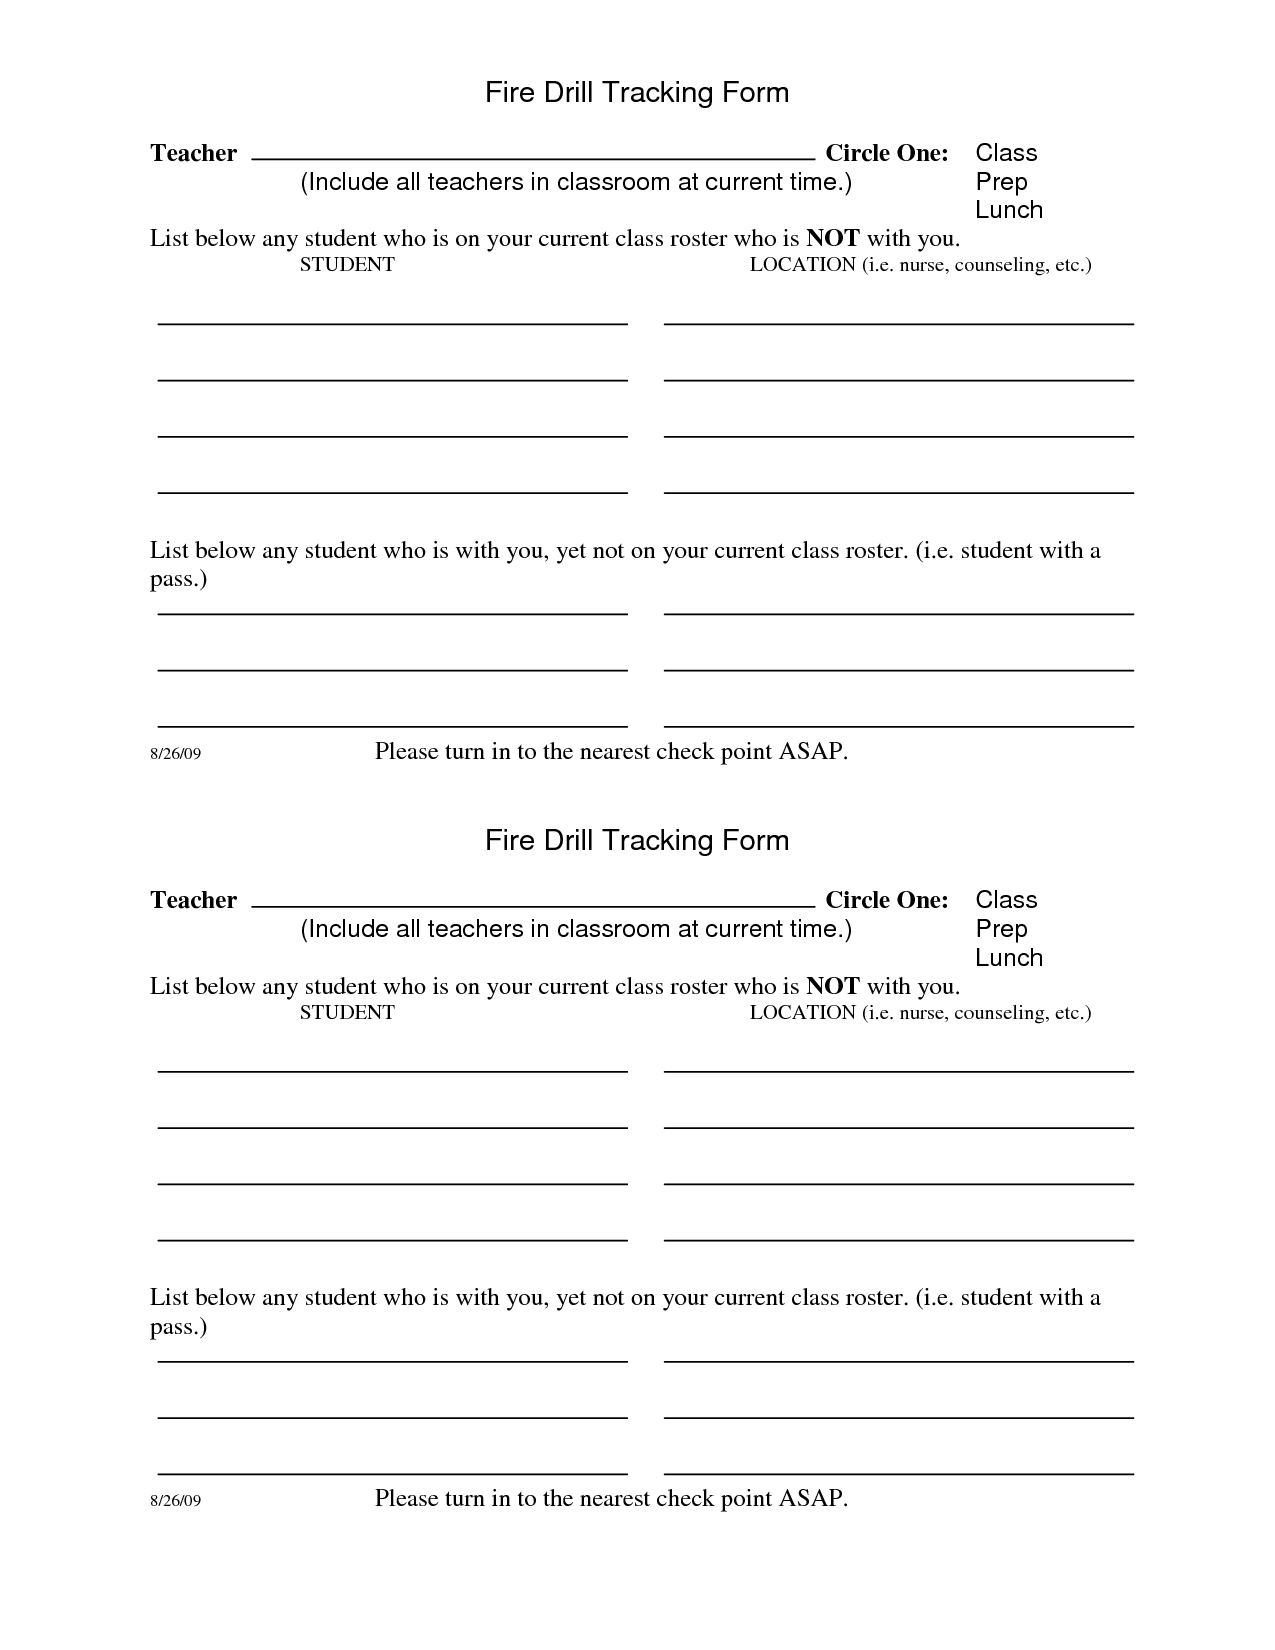 22 Images Of Osha Fire Drill Safety Template | Jackmonster With Regard To Emergency Drill Report Template